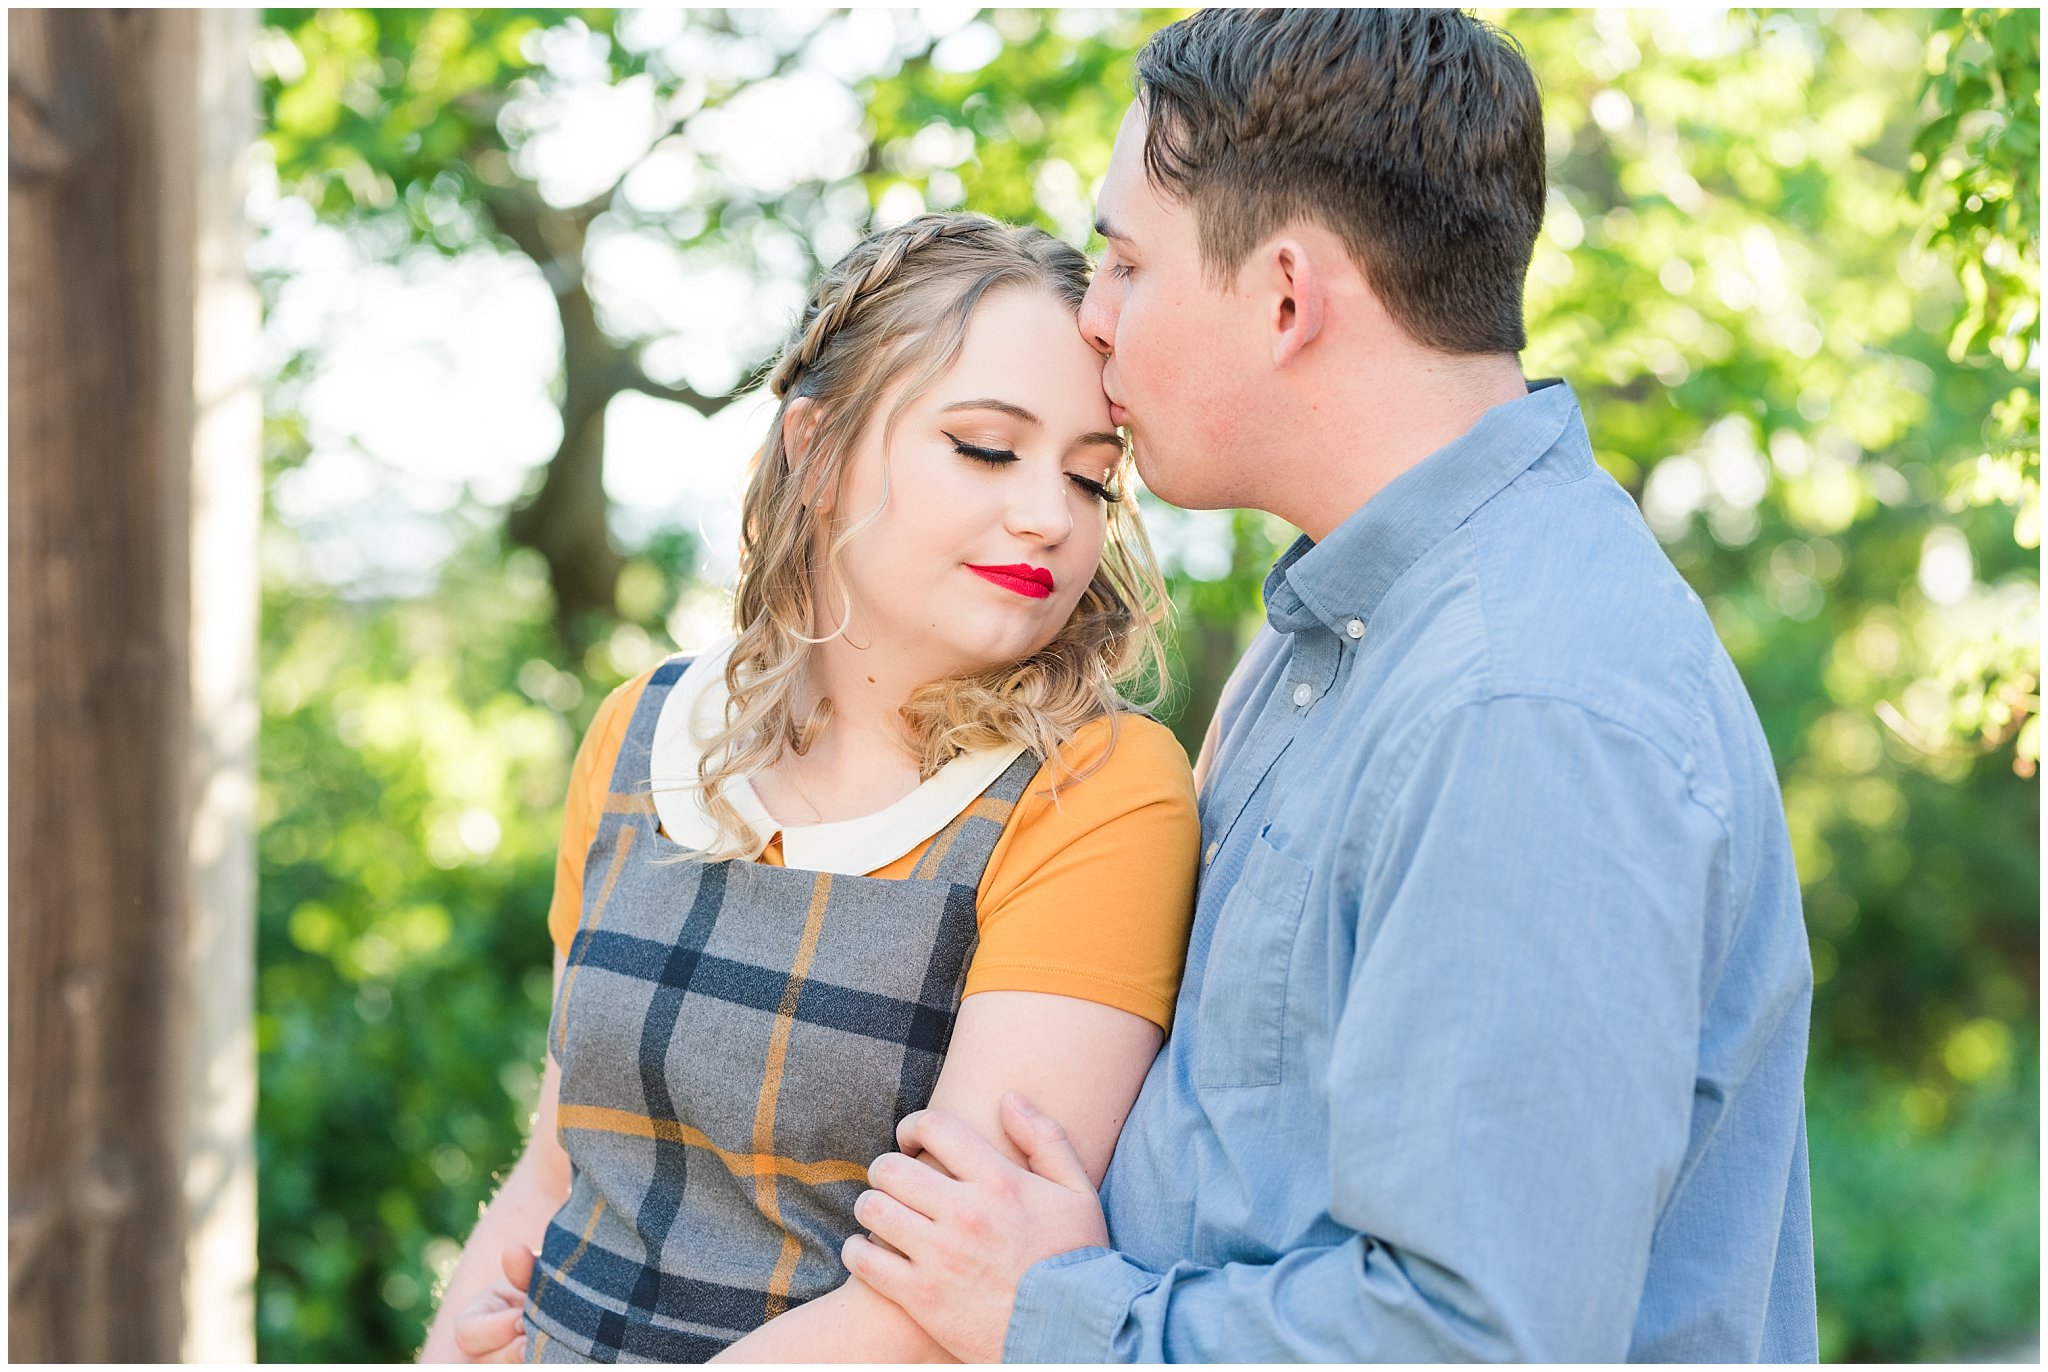 Couple dressed in yellow and blue for garden engagement session | Summer USU Botanical Garden Engagement Session | Jessie and Dallin Photography